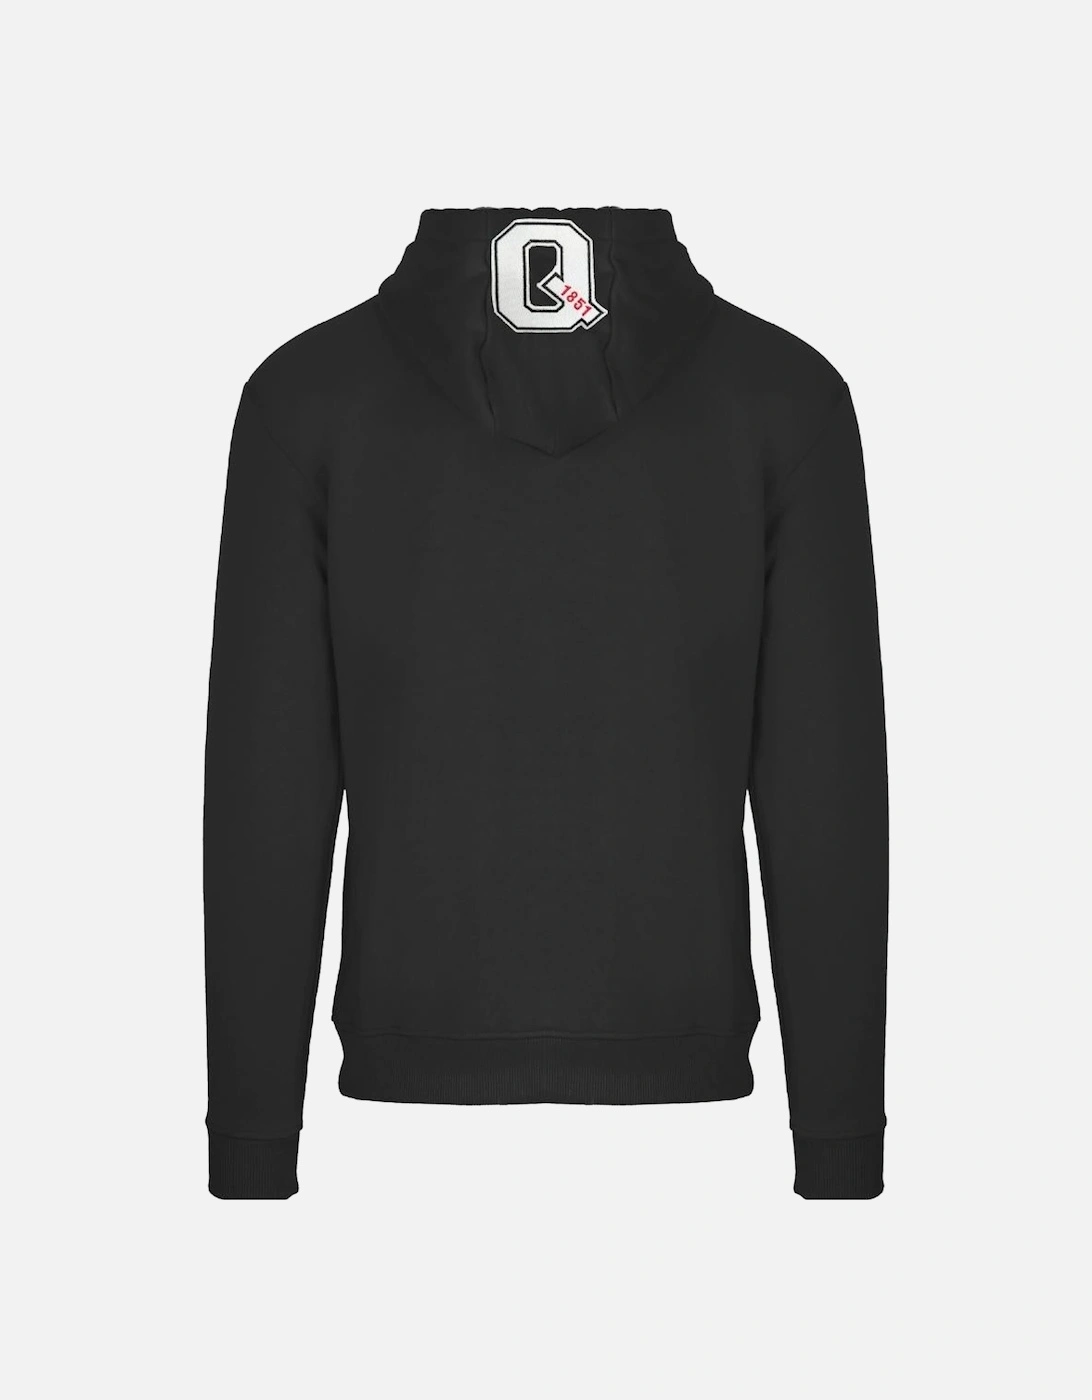 Classic Large A Logo Black Zip-Up Hoodie